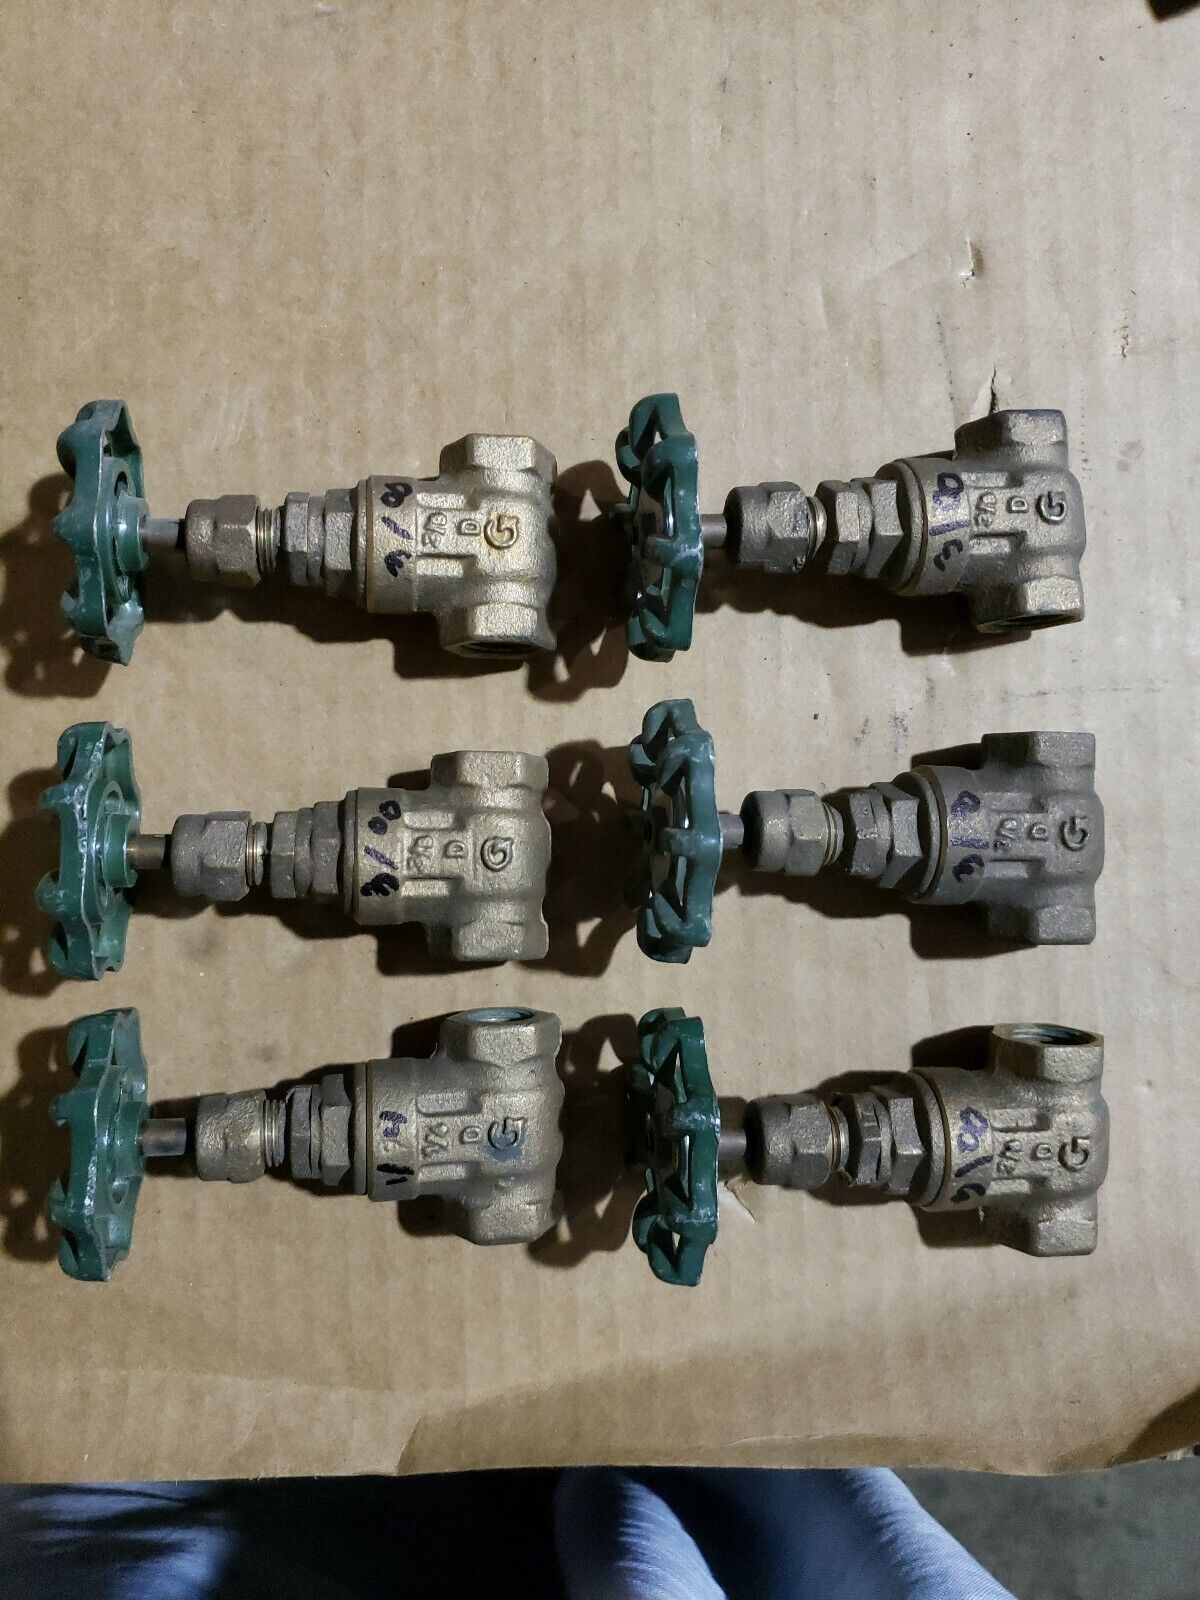 6 GRINNELL ITALIAN 3/8 INCH GATE VALVES  NPT THREADS EACH END NEW OLD STOCK